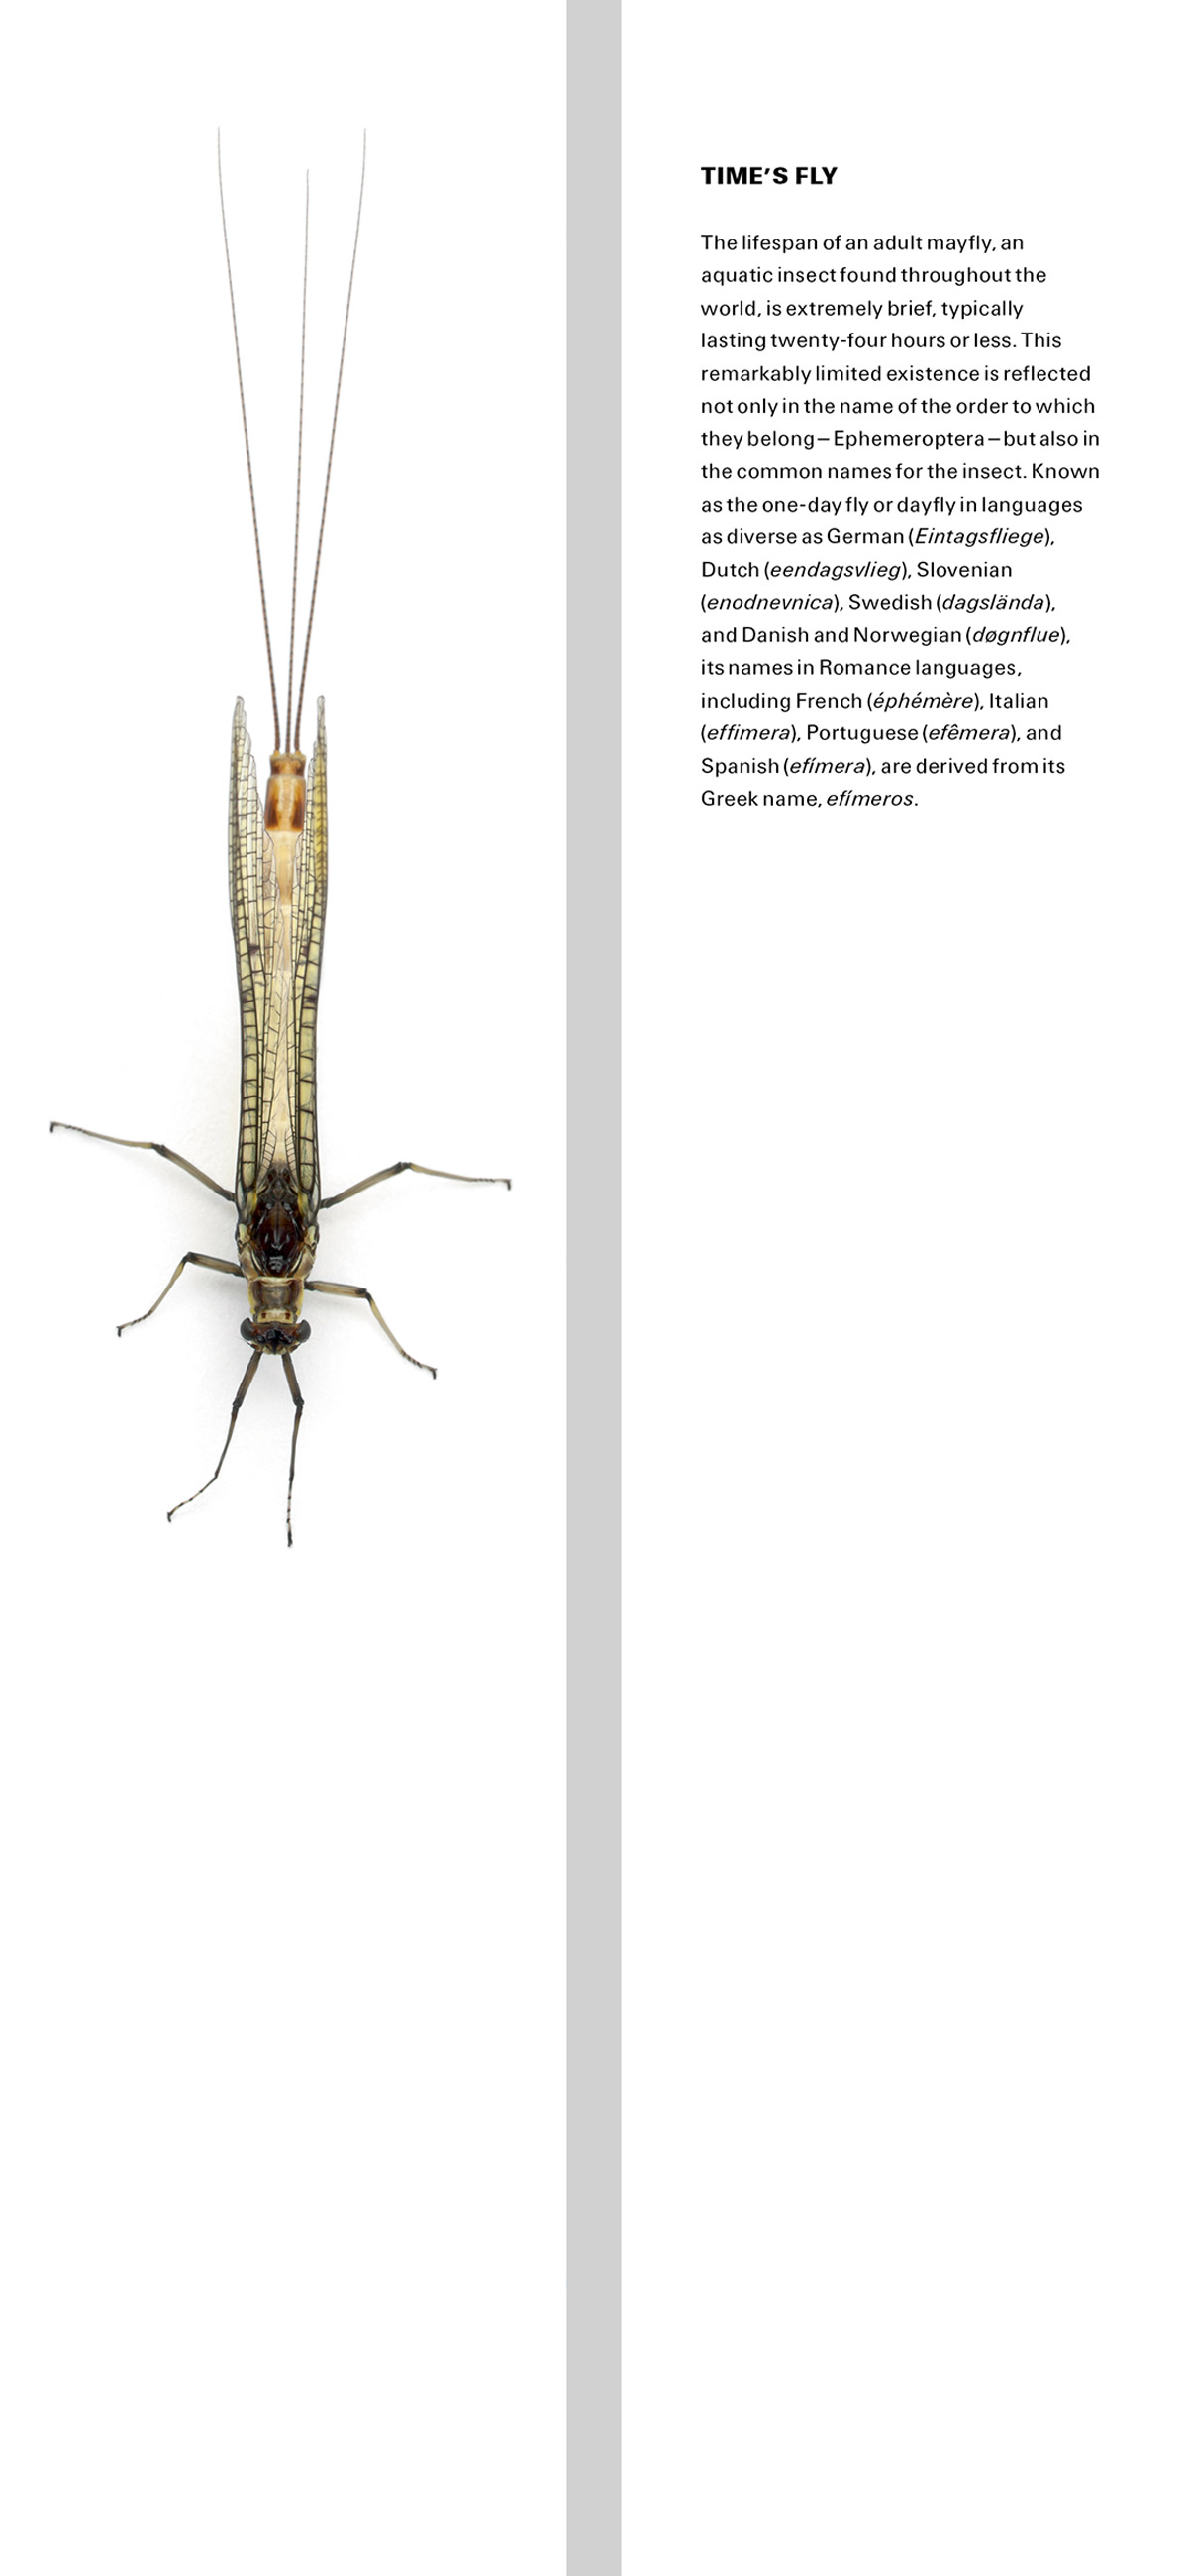 A bookmark whose front features a photograph of a mayfly. Its back contains text that reads: “TIME’S FLY The lifespan of an adult mayfly, an aquatic insect found throughout the world, is extremely brief, typically lasting twenty-four hours or less. This remarkably limited existence is reflected not only in the name of the order to which they belong—Ephemeroptera—but also in the common names for the insect. Known as the one-day fly or dayfly in languages as diverse as German (Eintagsfliege), Dutch (eendagsvlieg), Slovenian (enodnevnica), Swedish (dagslända),
and Danish and Norwegian (døgnflue), its names in Romance languages, including French (éphémère), Italian (effimera), Portuguese (efêmera), and Spanish (efímera), are derived from its Greek name, efímeros.”